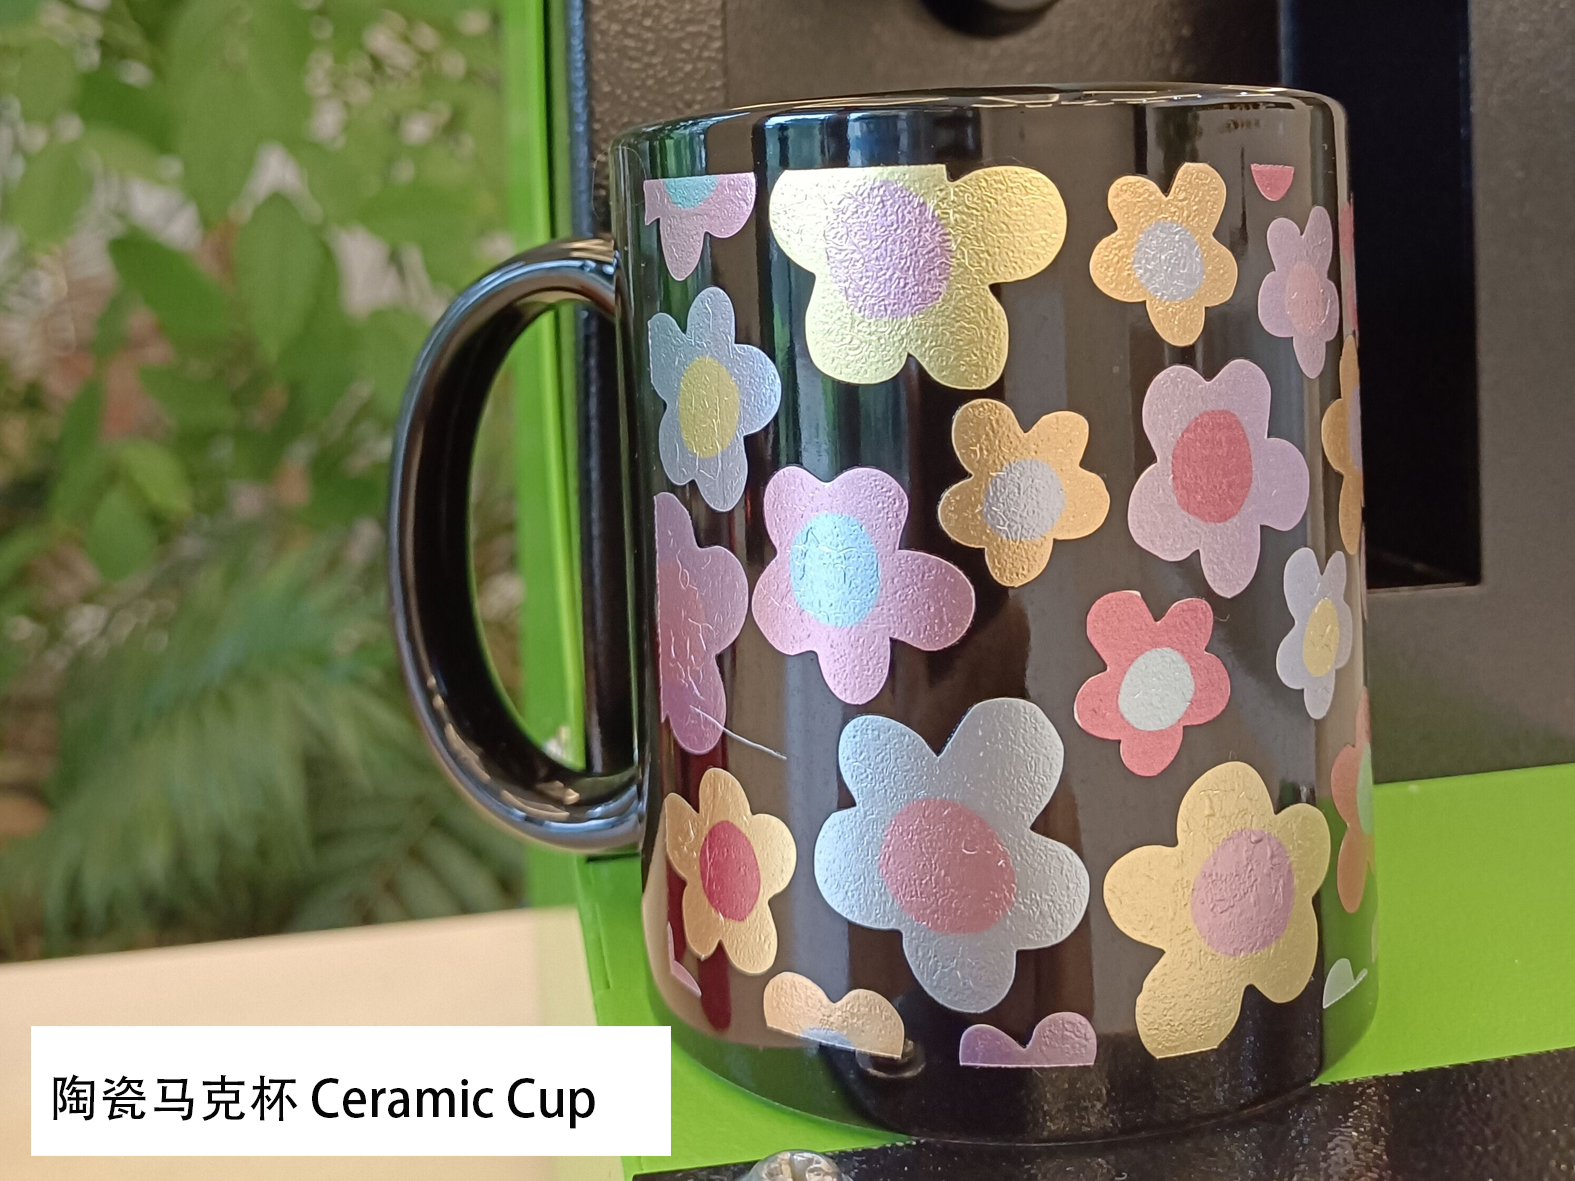 https://www.alizarinchina.com/solutions/which-investment-is-best-for-beginner-to-make-the-colorful-logo-of-ceramic-mug